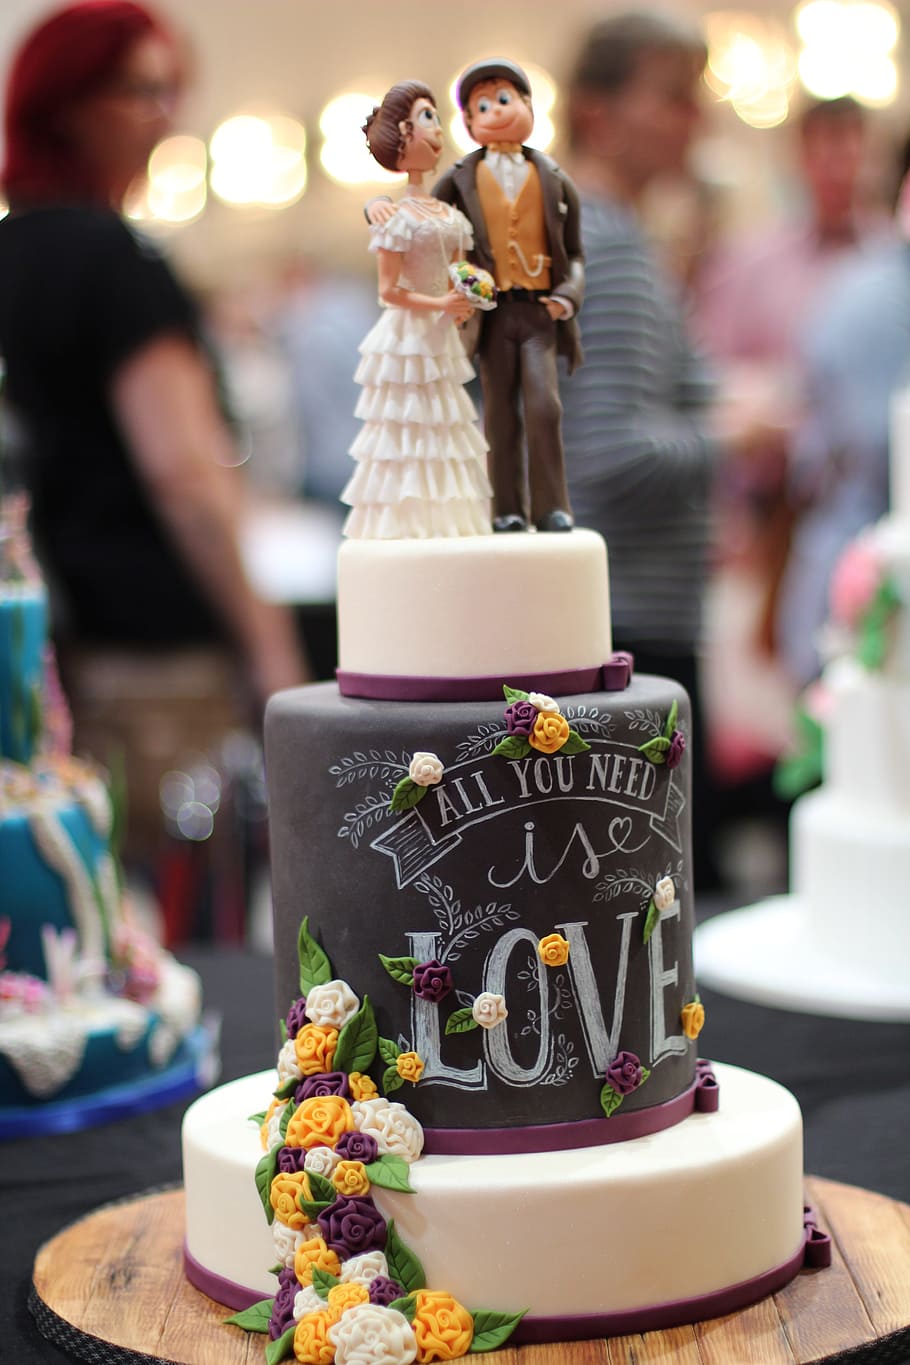 photo of wedding cake on table, marry, sweet, love is all you need